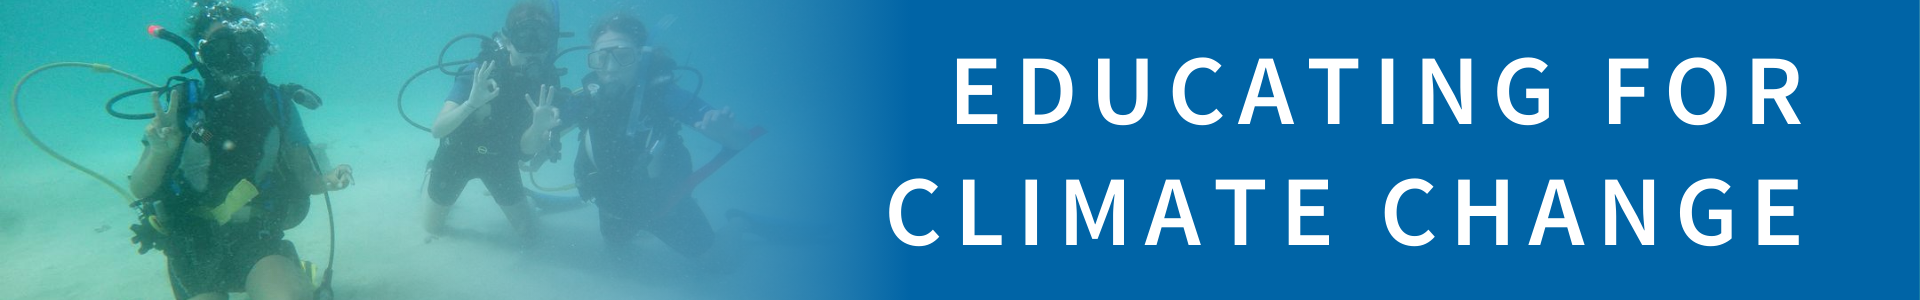 Educating for Climate Change